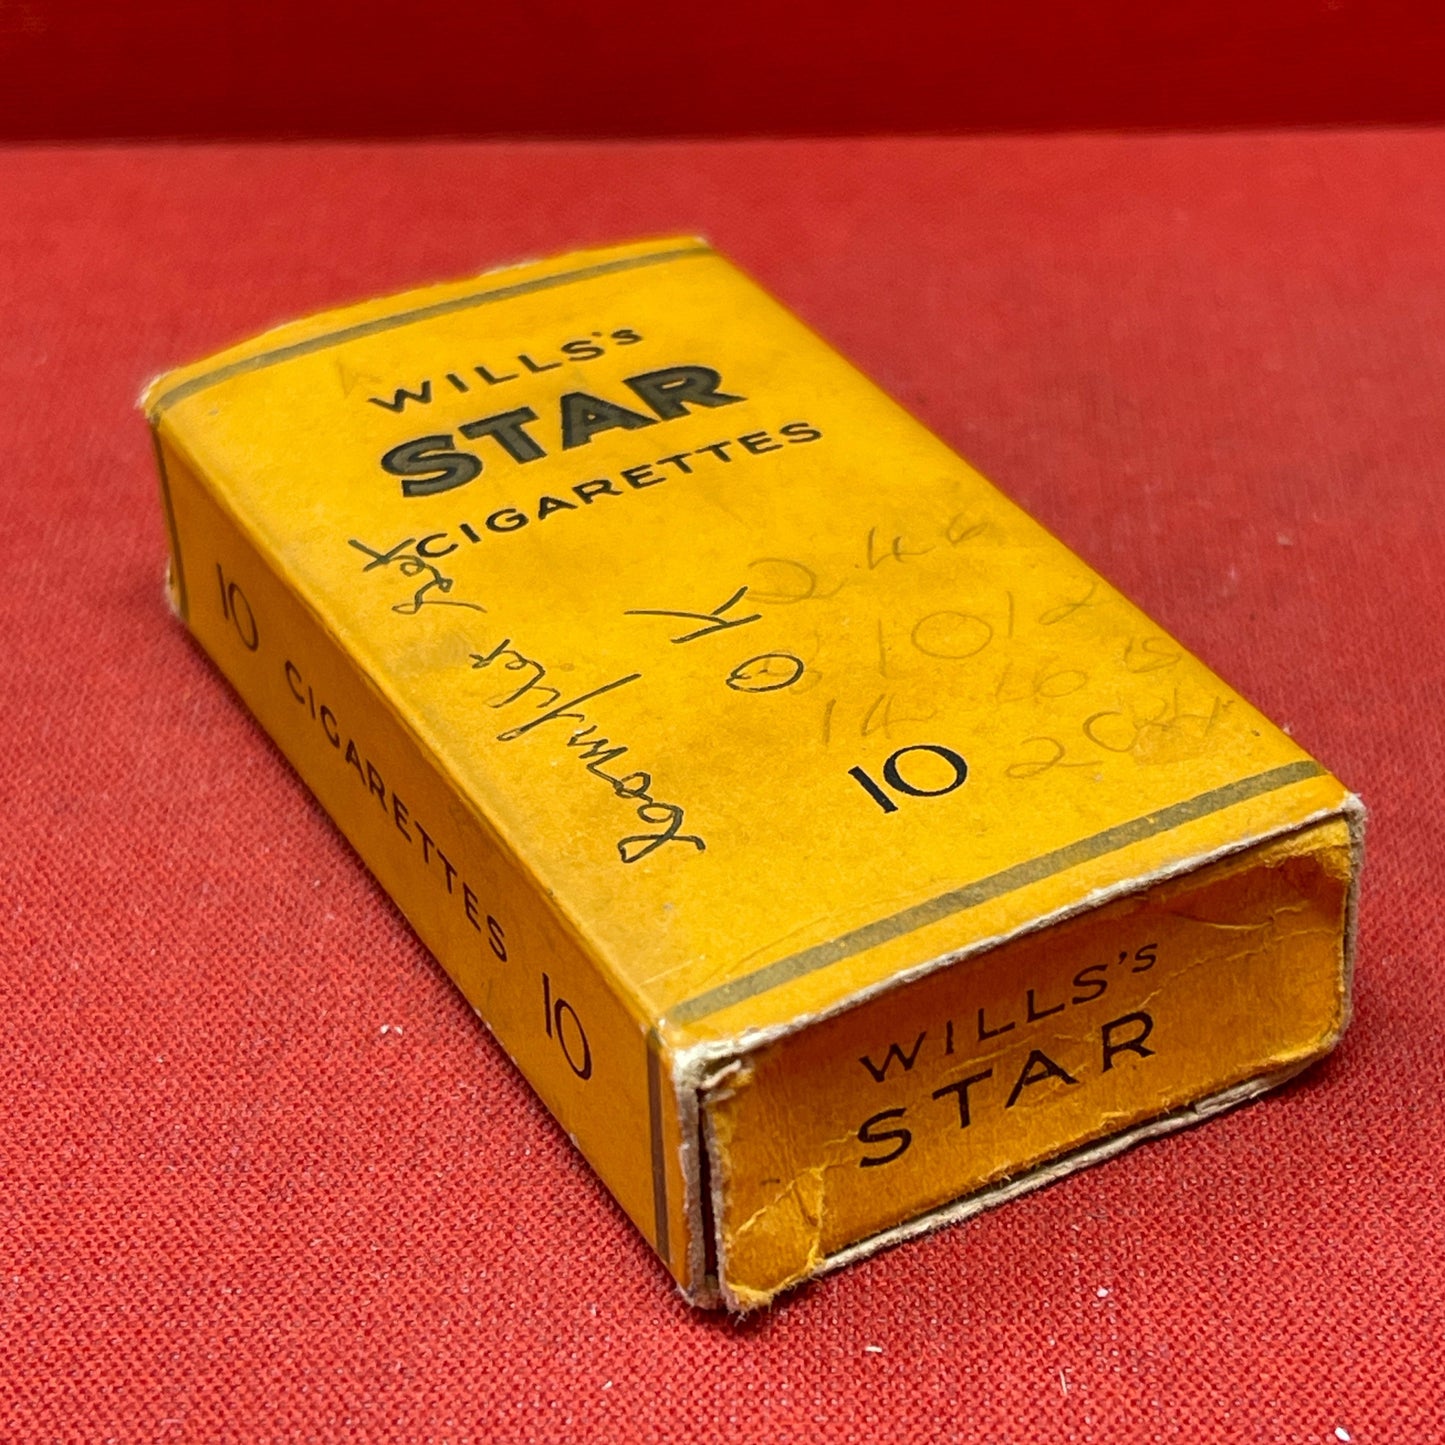 Packet of Wills Star' cigarettes by WD & HO Wills